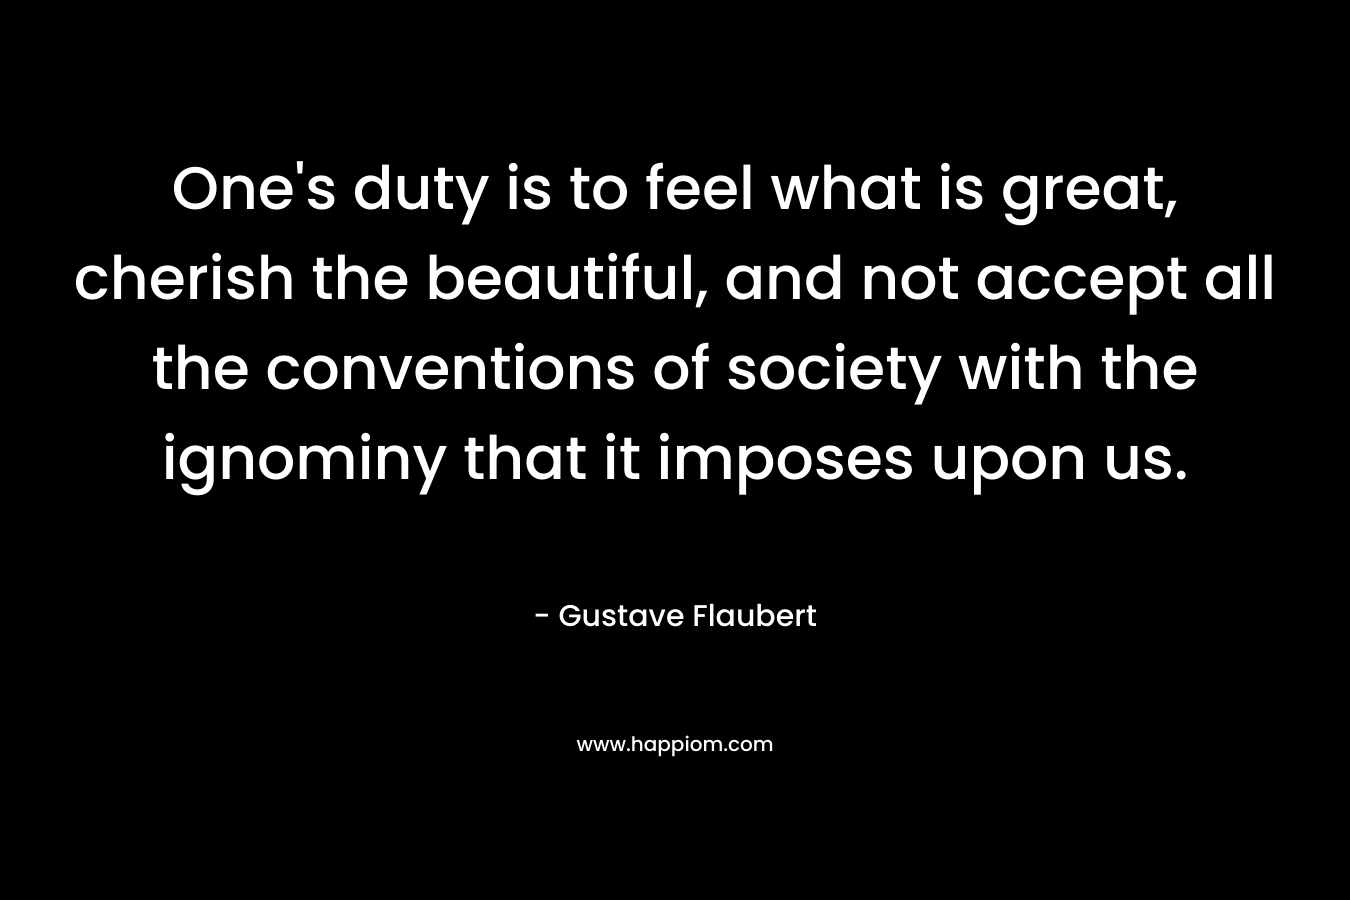 One’s duty is to feel what is great, cherish the beautiful, and not accept all the conventions of society with the ignominy that it imposes upon us. – Gustave Flaubert